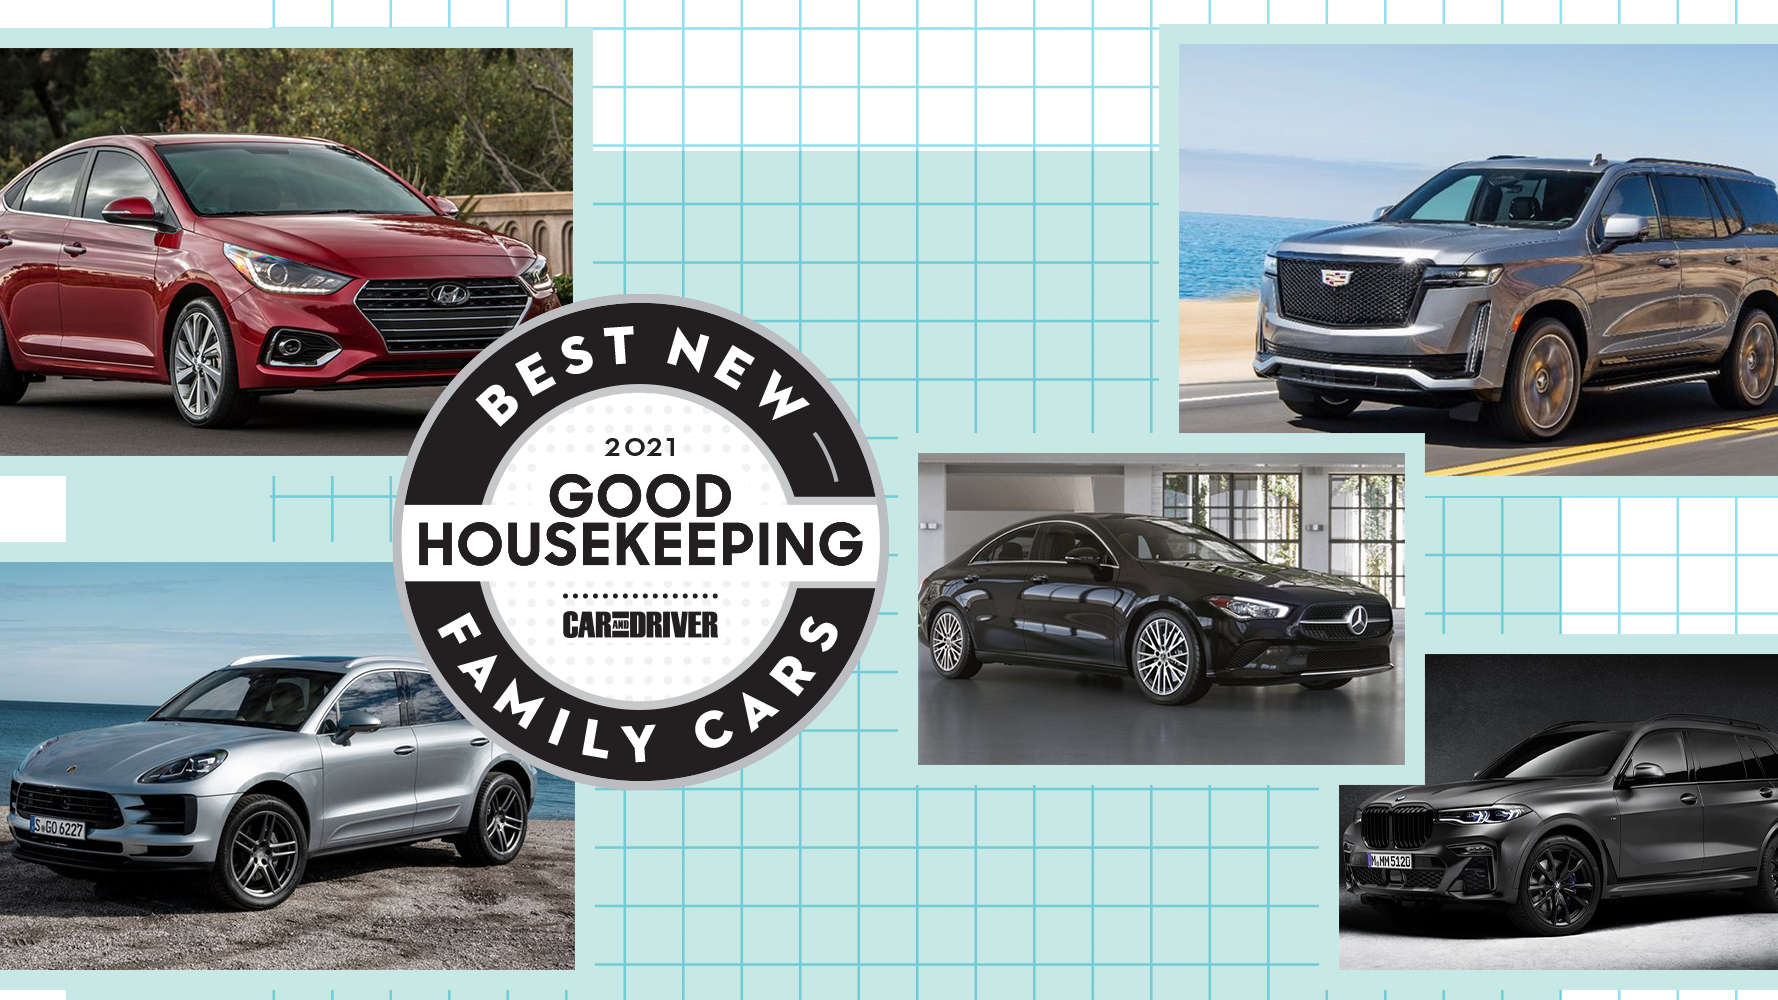 Plante triathlete målbar 18 Best Family Cars of 2021 - Top-Tested New Sedans and SUVs for Families